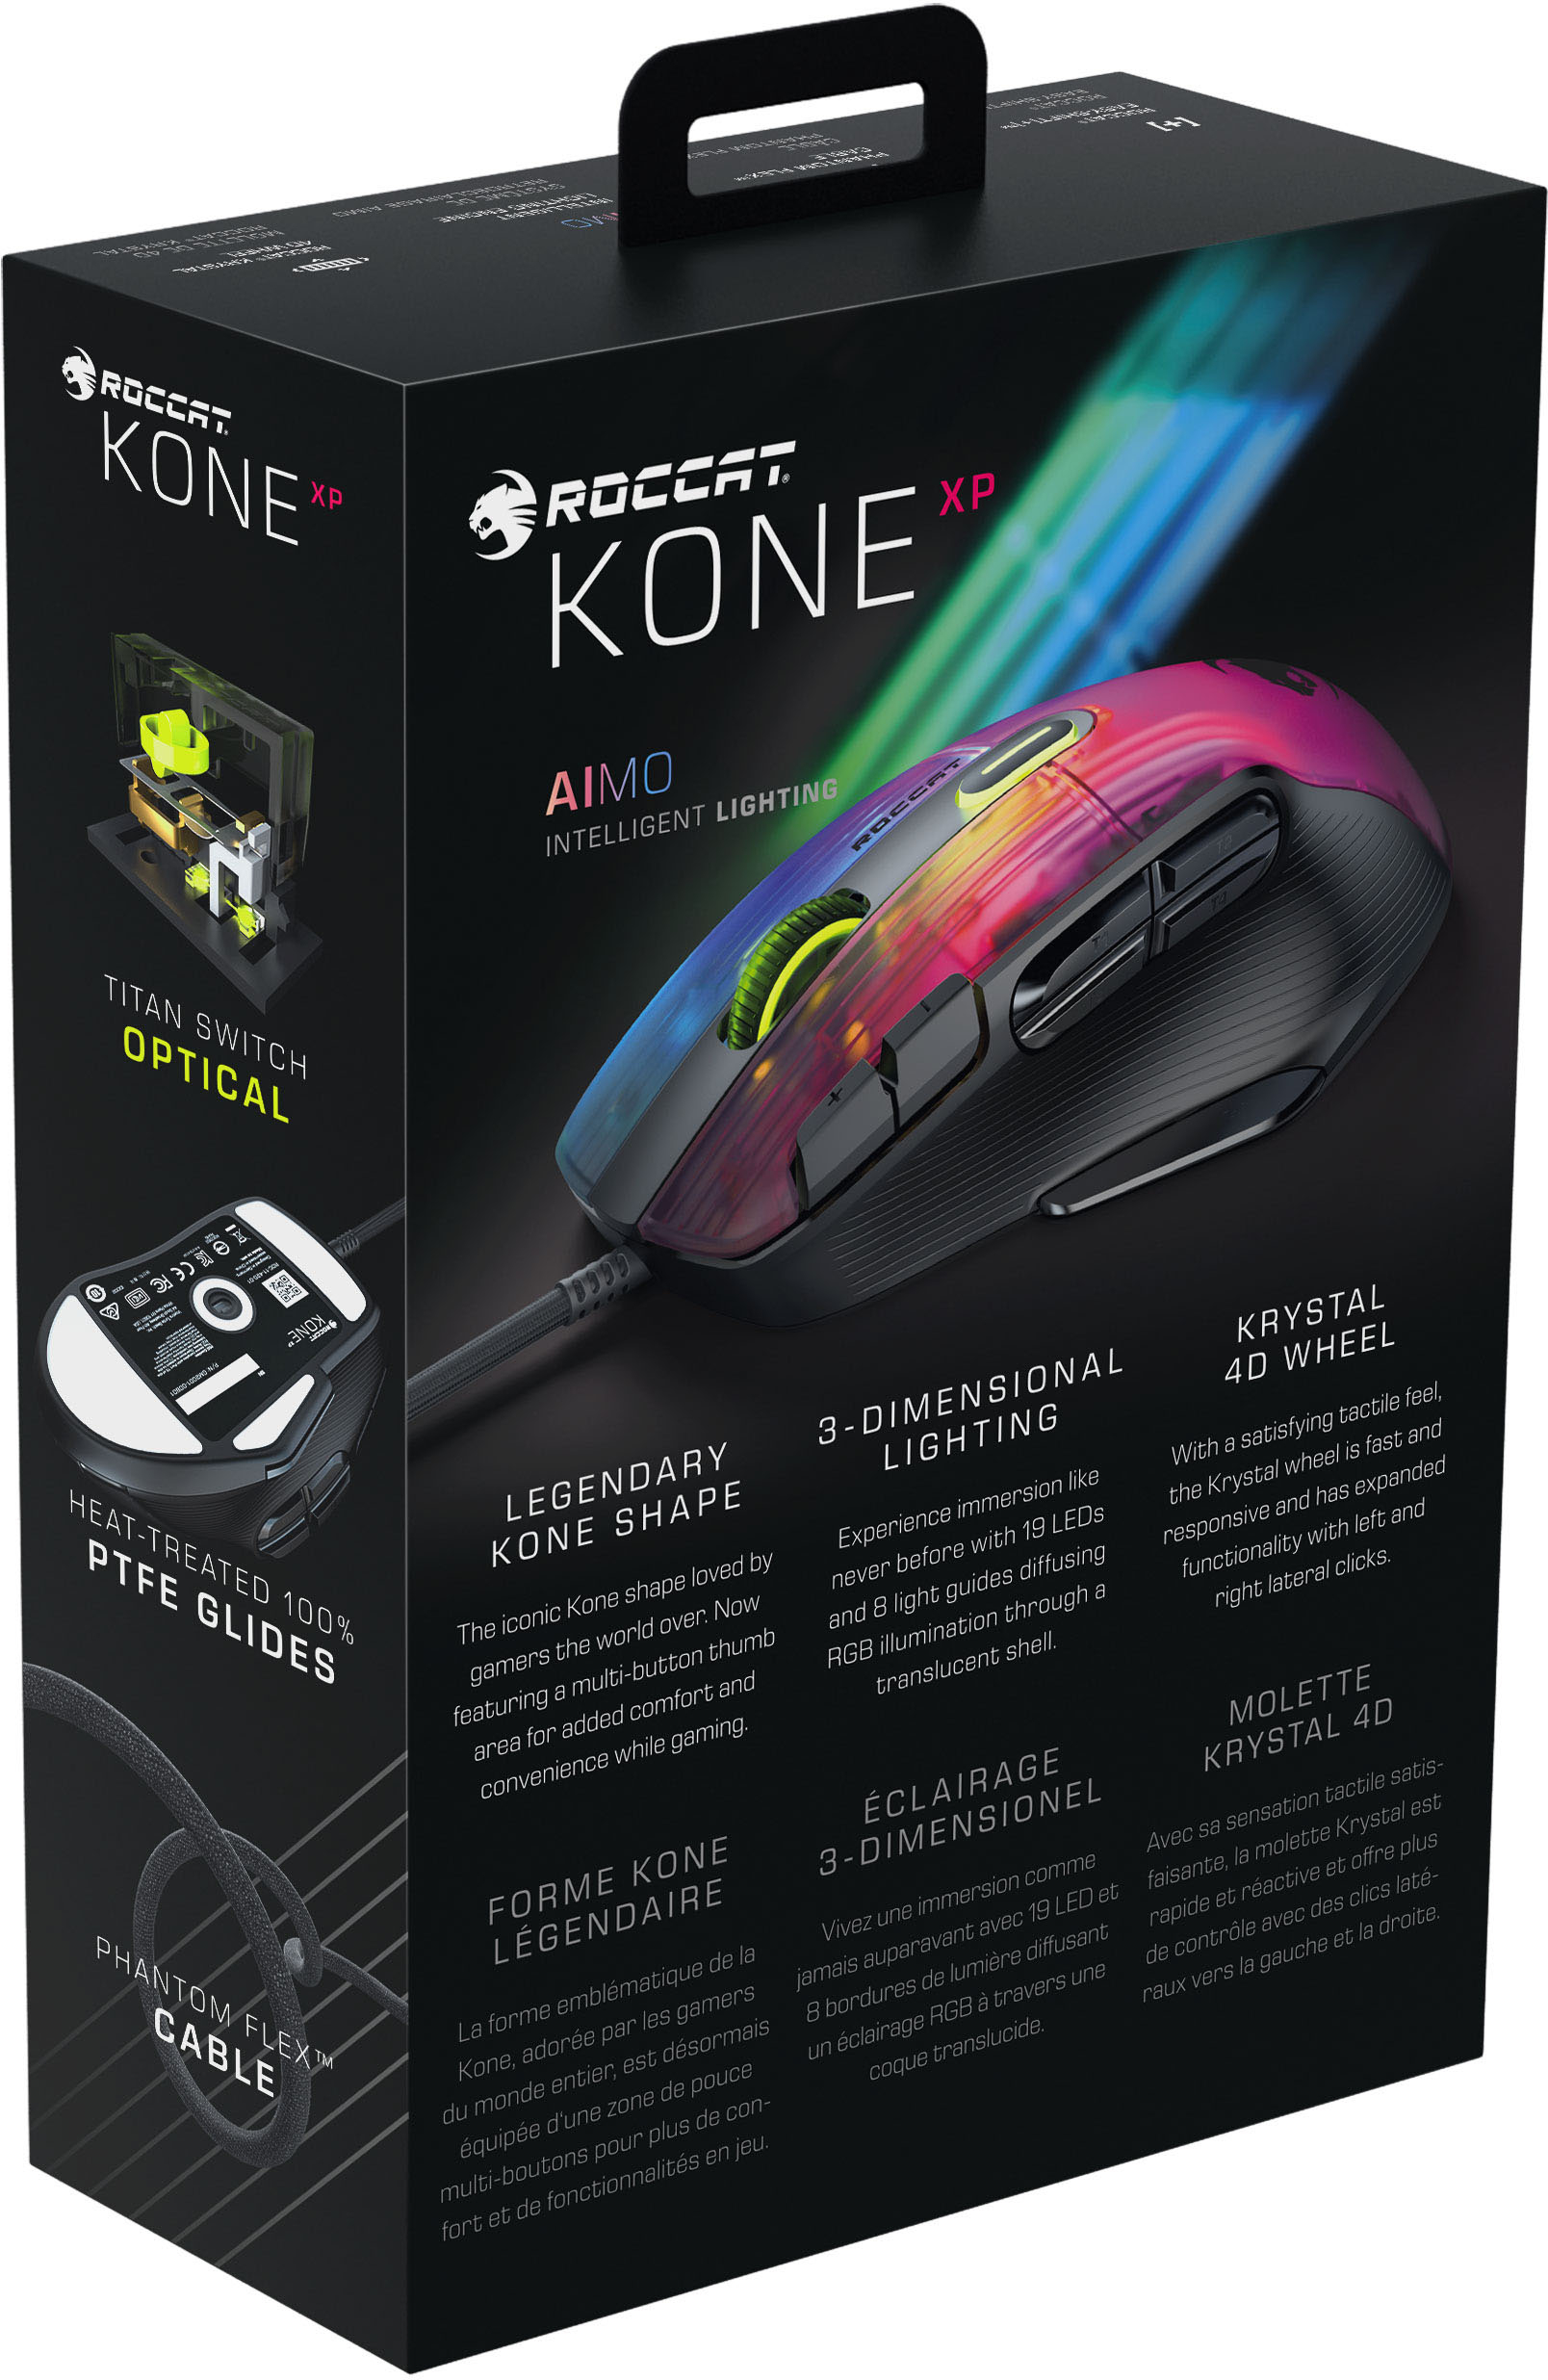 RGB Mouse Buy Ambidextrous lighting with & Optical design XP ROC-11-420-01 AIMO - Kone Black multi-button Wired ROCCAT Gaming Best